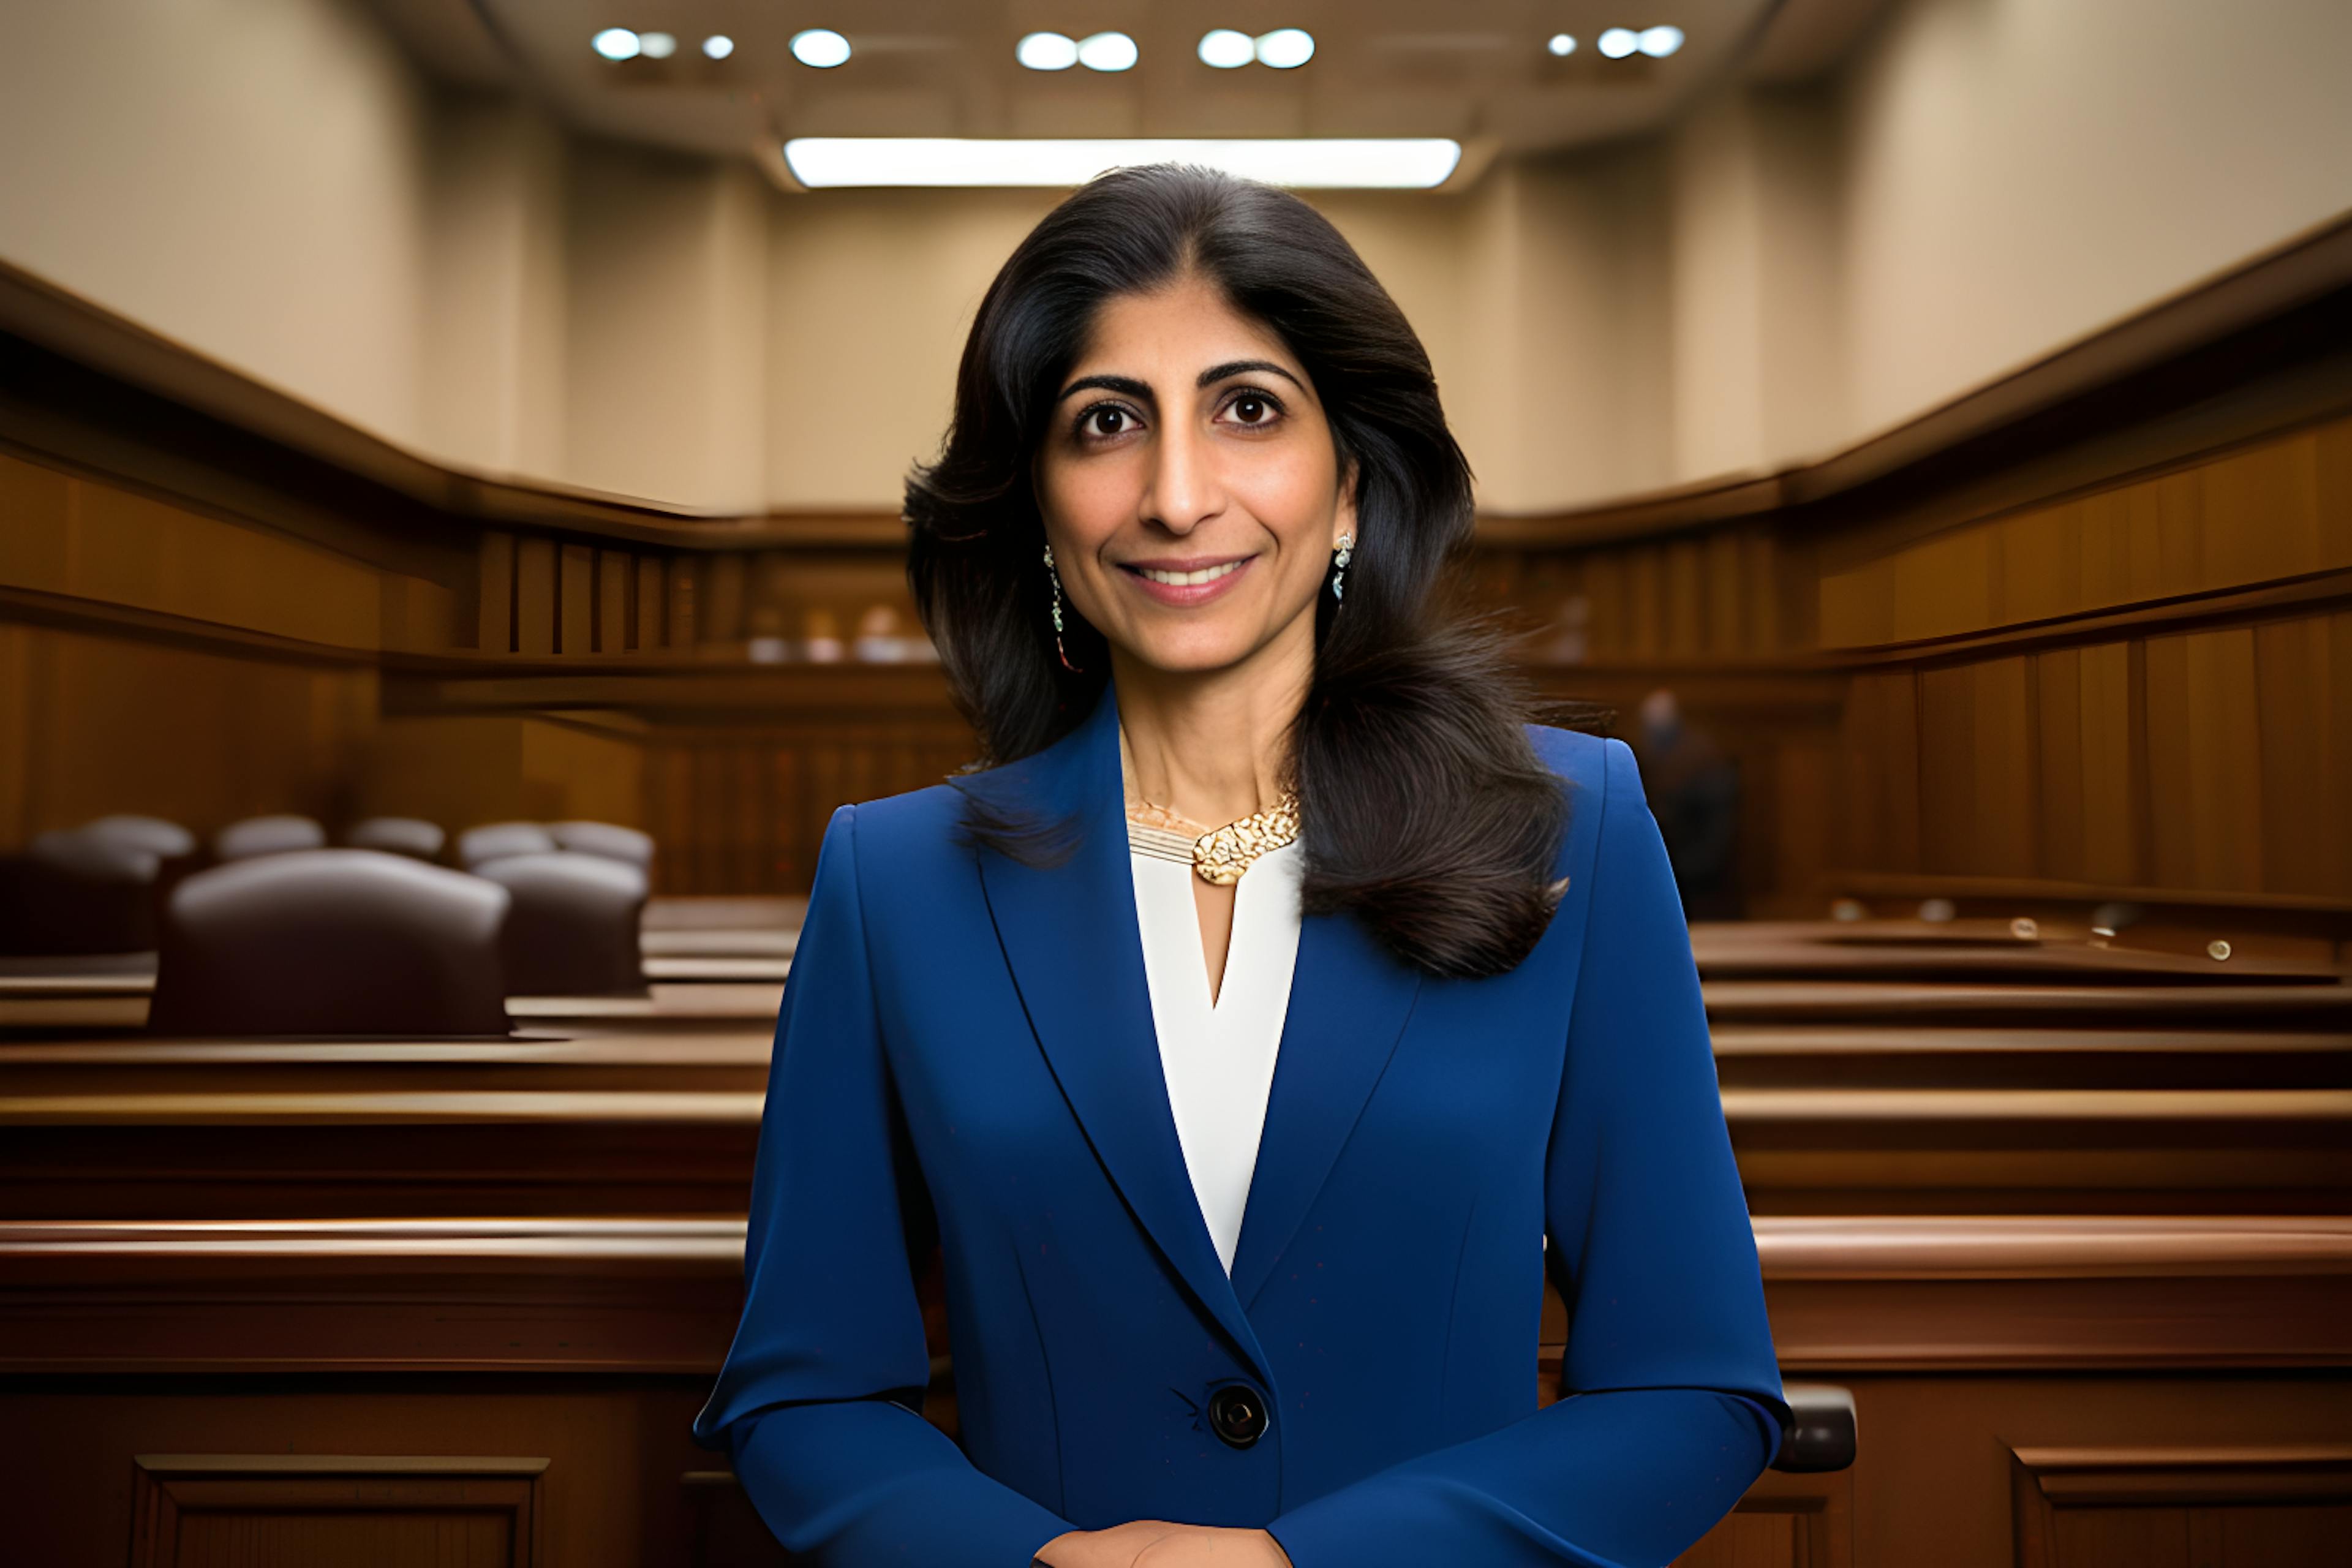 featured image - Lina Khan, FTC Chair, Aims to Loosen Amazon's Iron Grip on Online Marketplaces